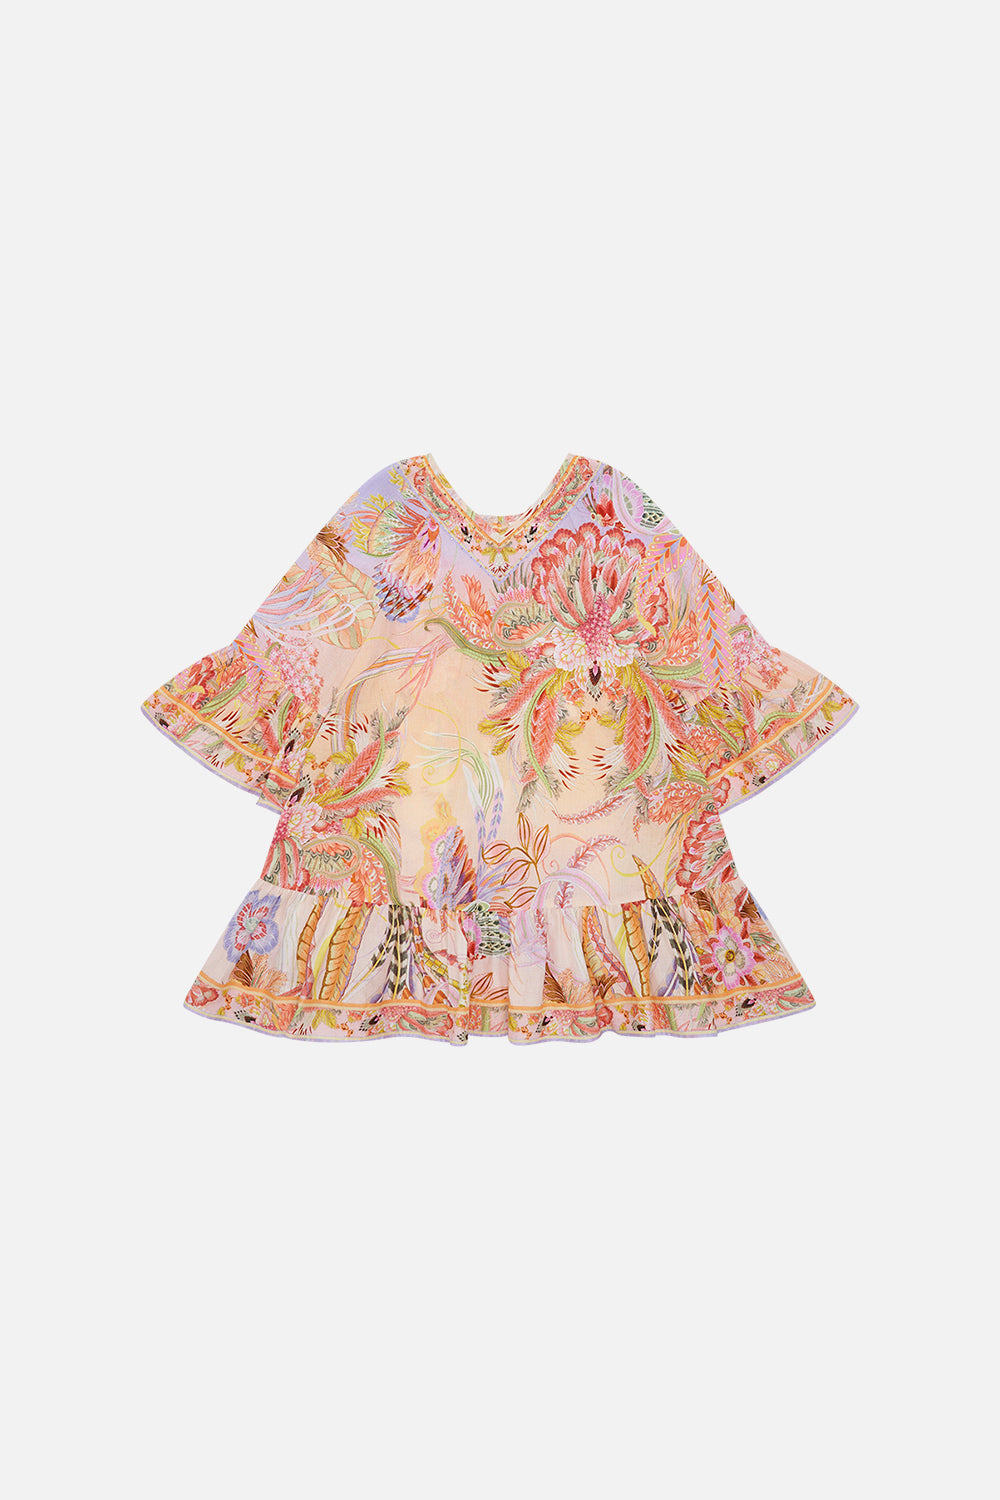 Milla by CAMILLA kids a line dress in Comsic Tuscan print